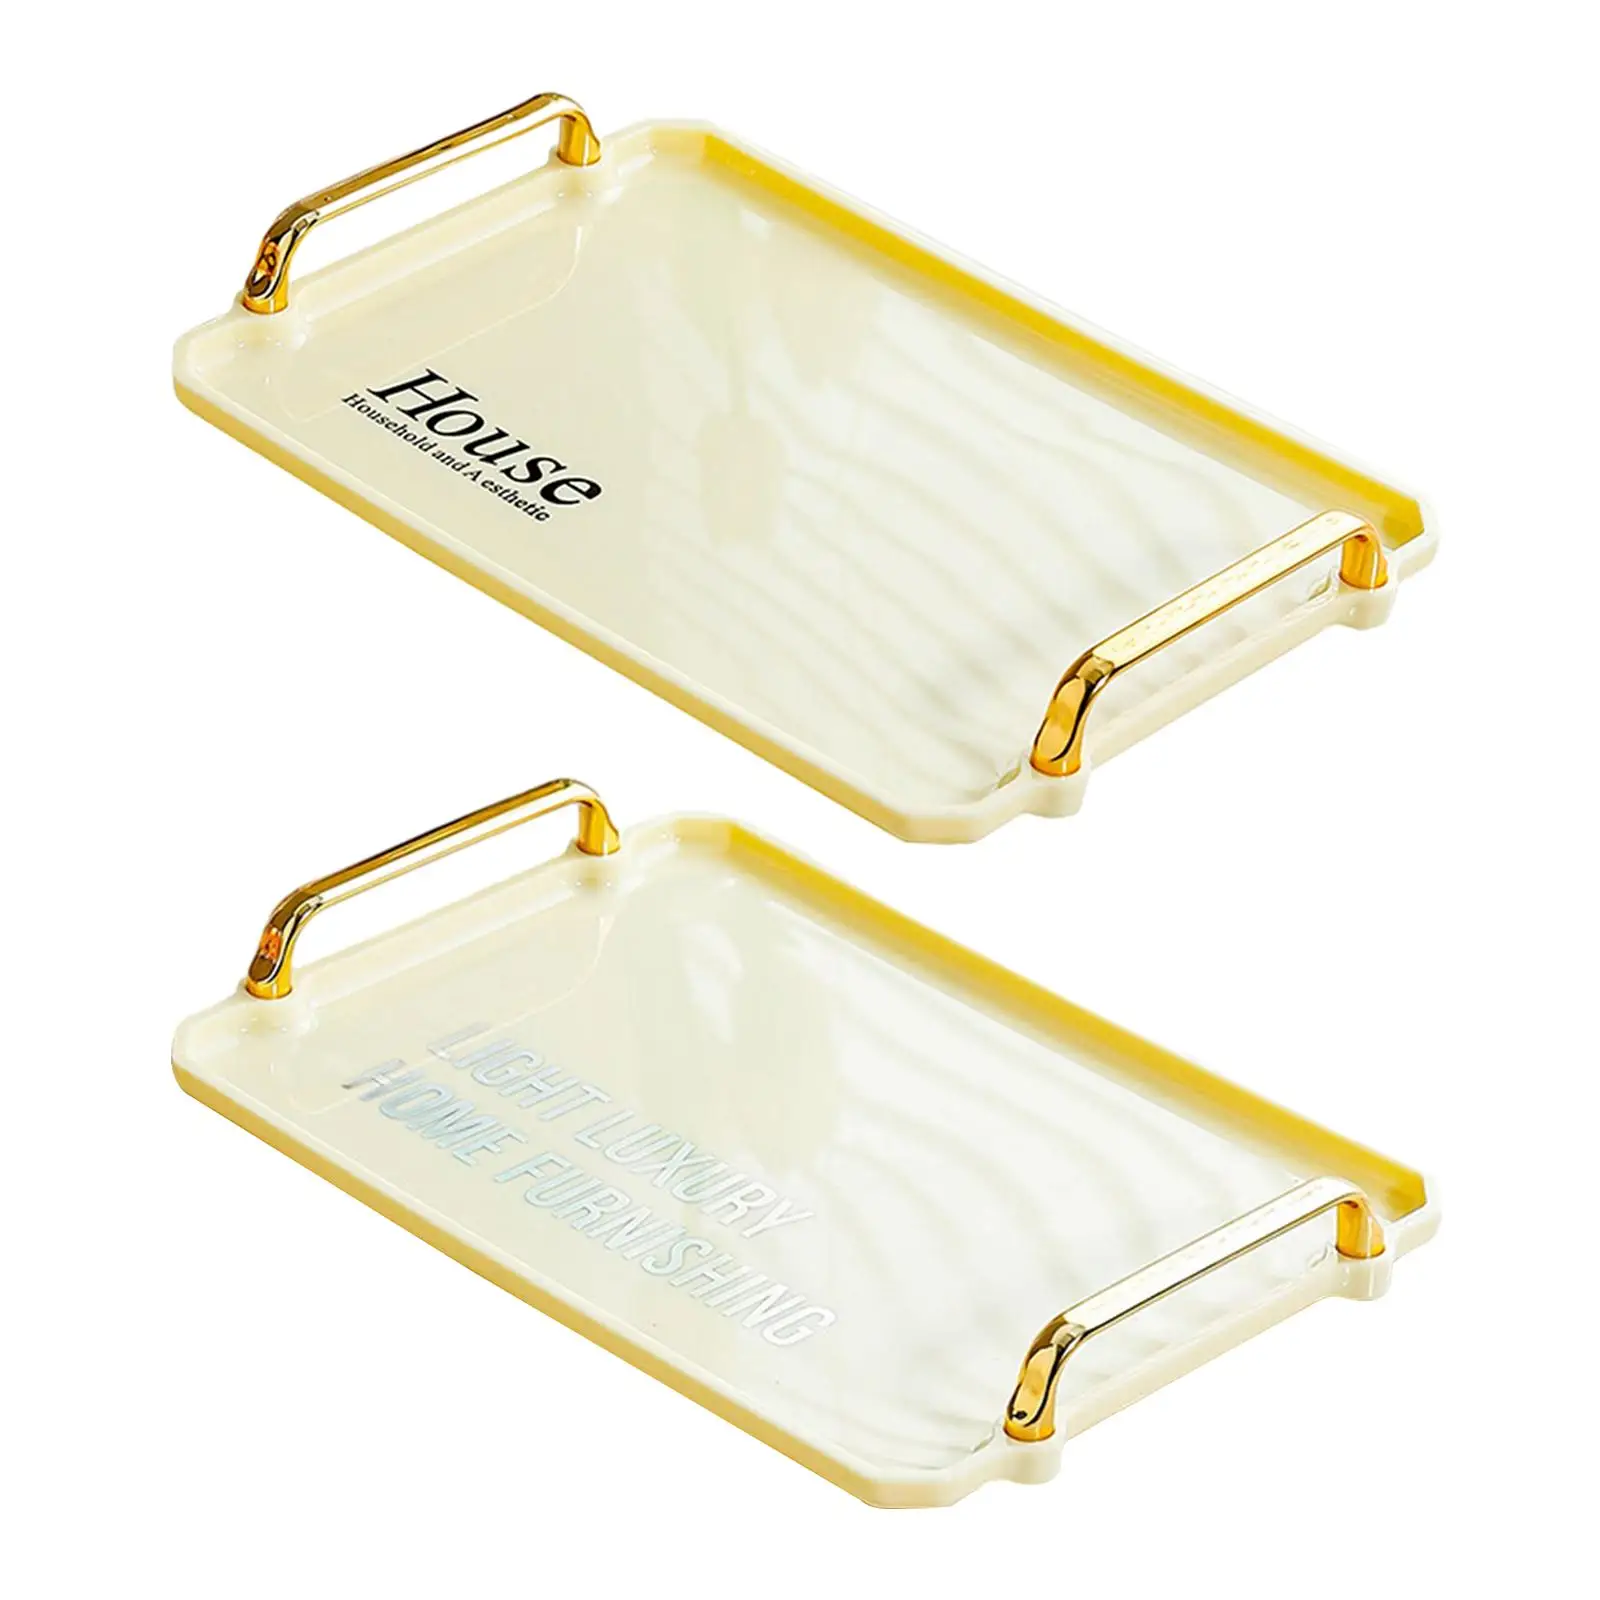 Serving Tray with Gold Handles Storage Multipurpose Practical Rectangle Tray Modern for Drinks Bedroom Home Party